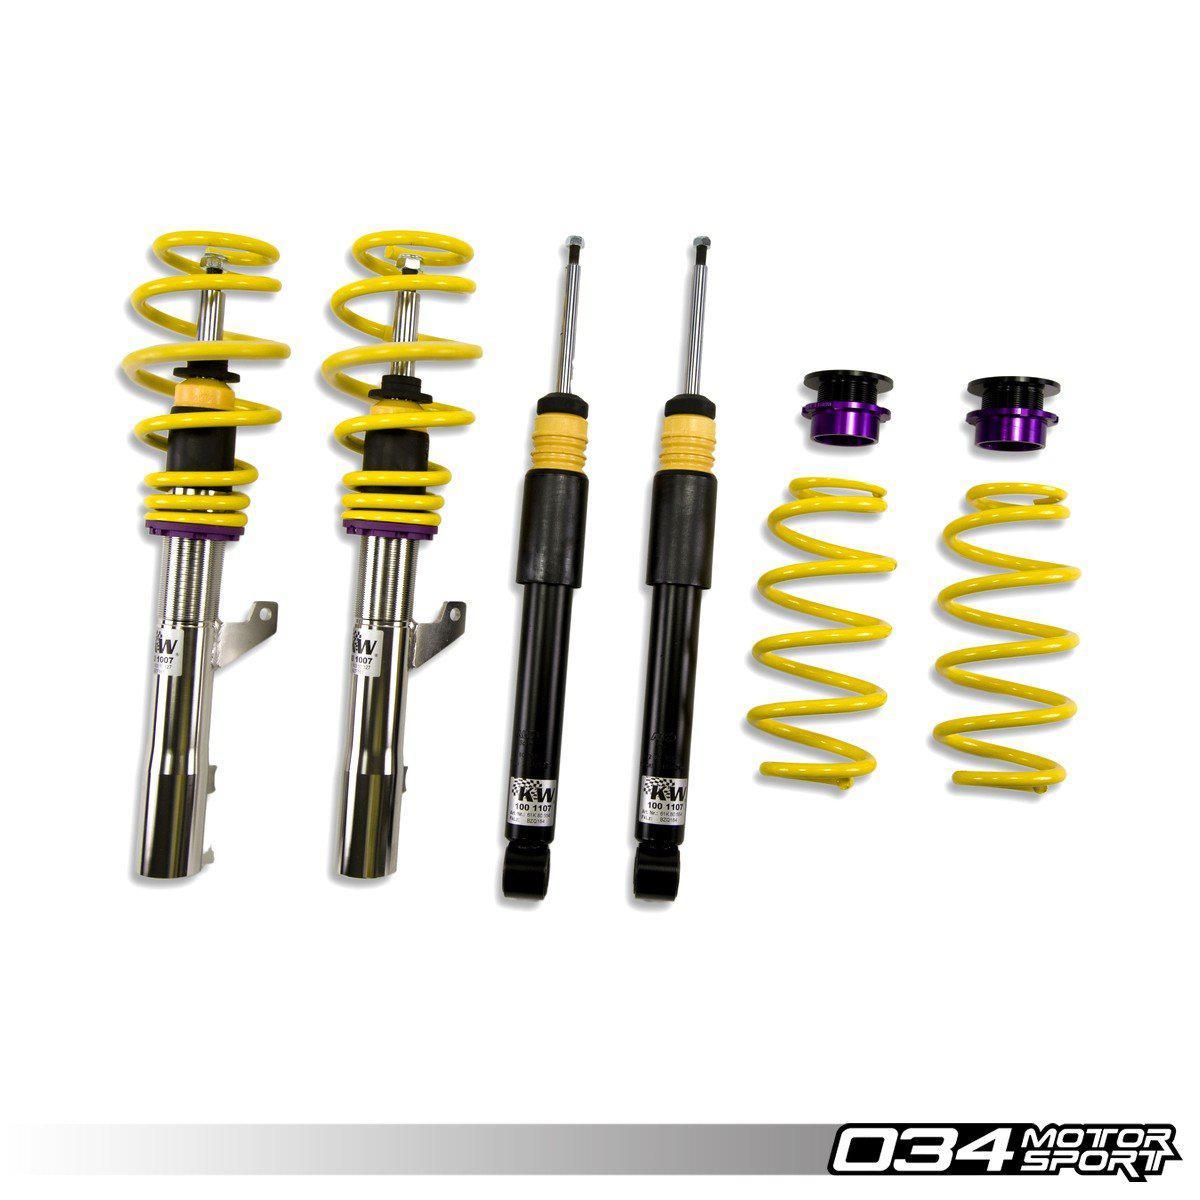 KW Variant 2 Coilover Suspension, 8p Audi A3 Quattro & B6/B7 Volkswagen Passat Without Edc-A Little Tuning Co